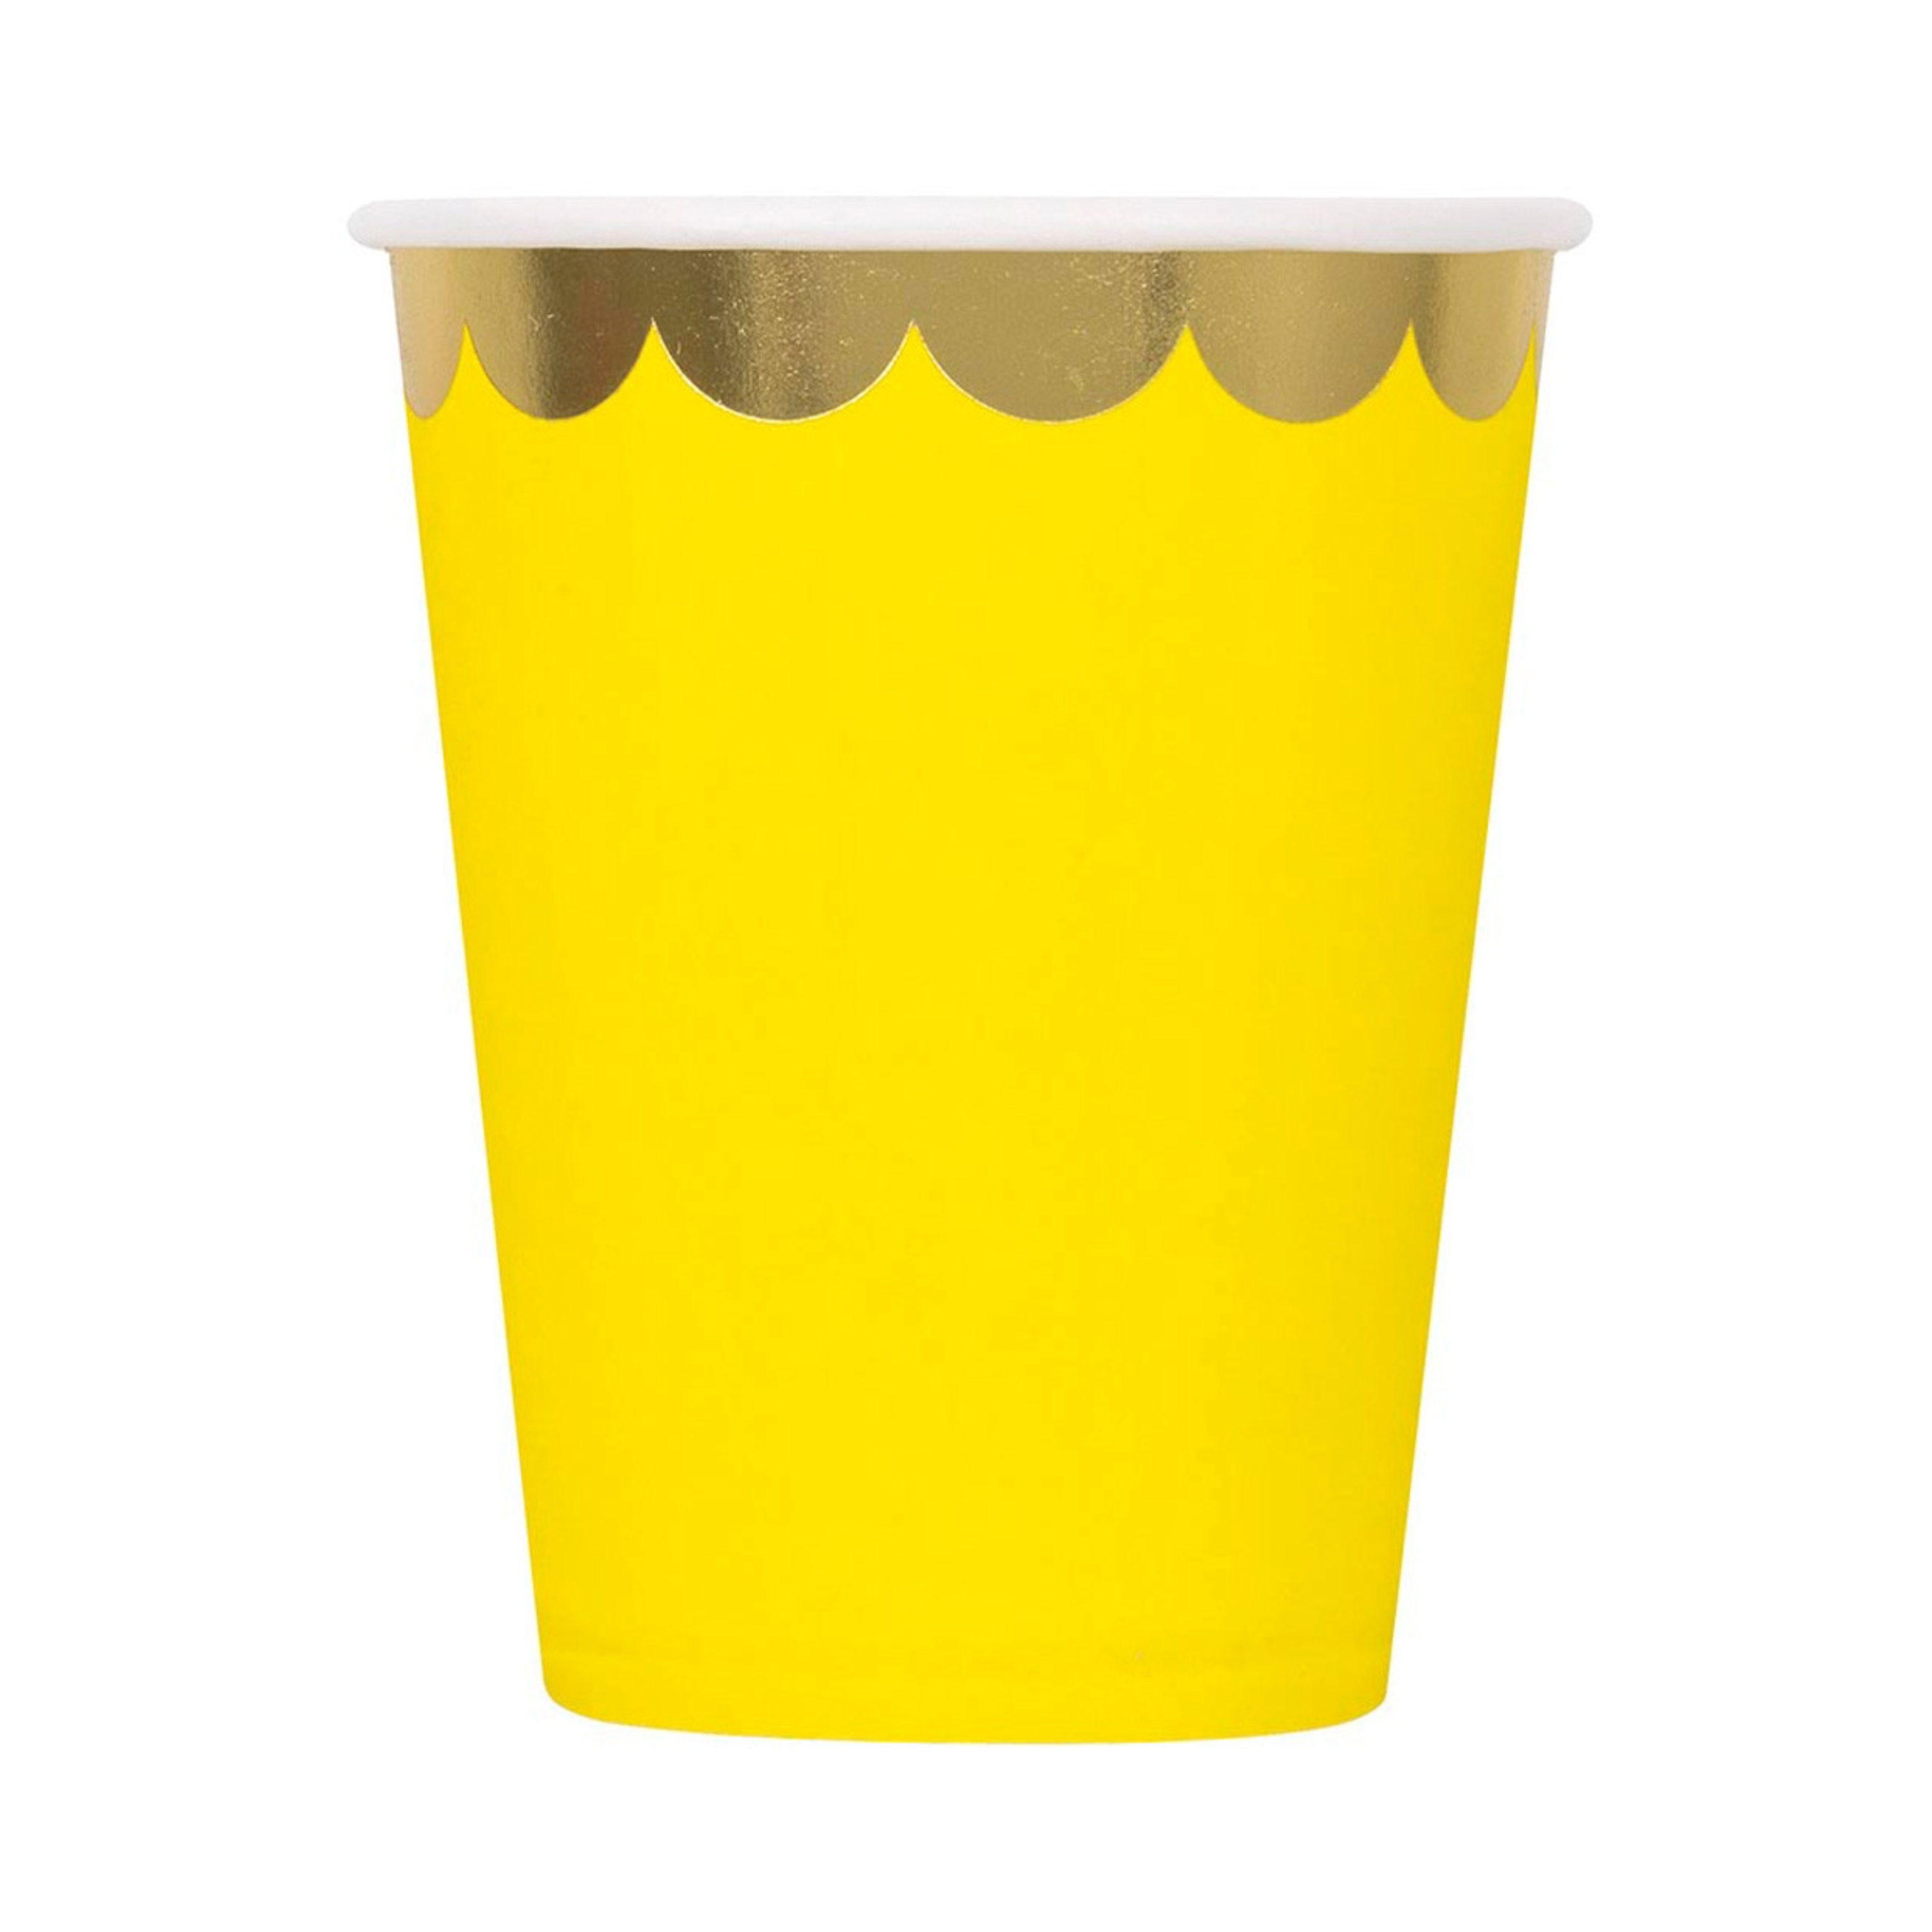 Assorted Color Scalloped Edge Birthday Party 12 oz Beverage Cups, Pack of 12 - Amazing Pinatas 